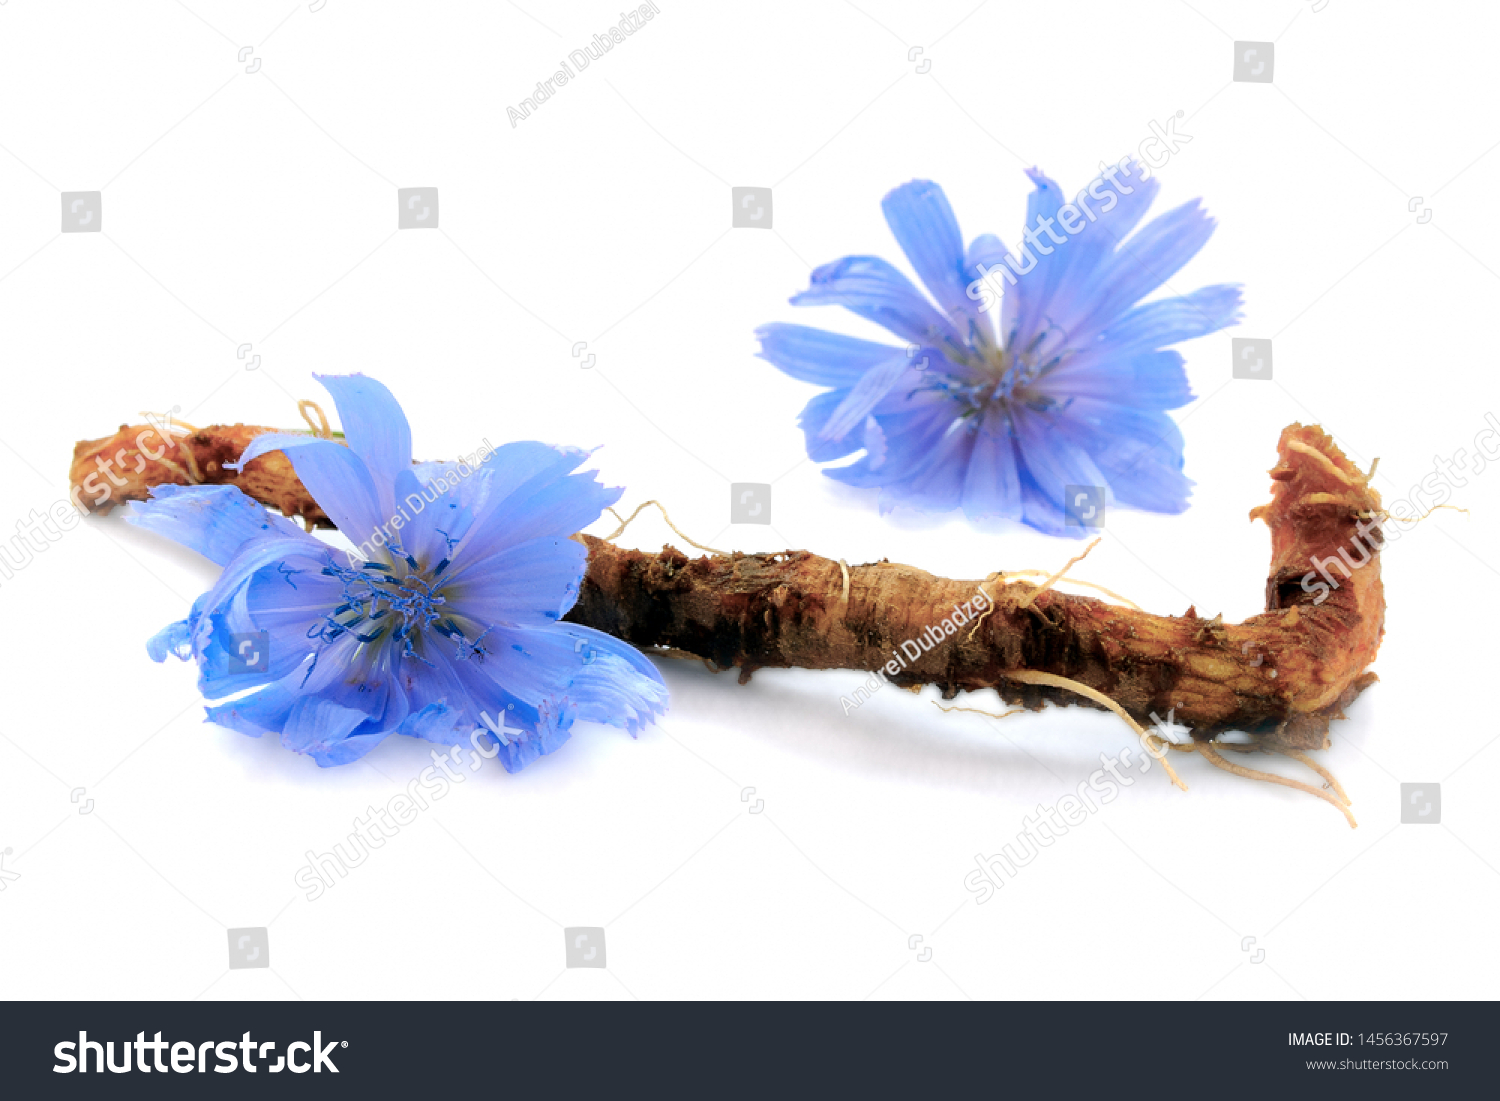 Chicory root and flowers are isolated on white background. Blue flowers of chicory. Chicory root is considered a coffee substitute and is a source of inulin. Inulin is used in the food industry. #1456367597